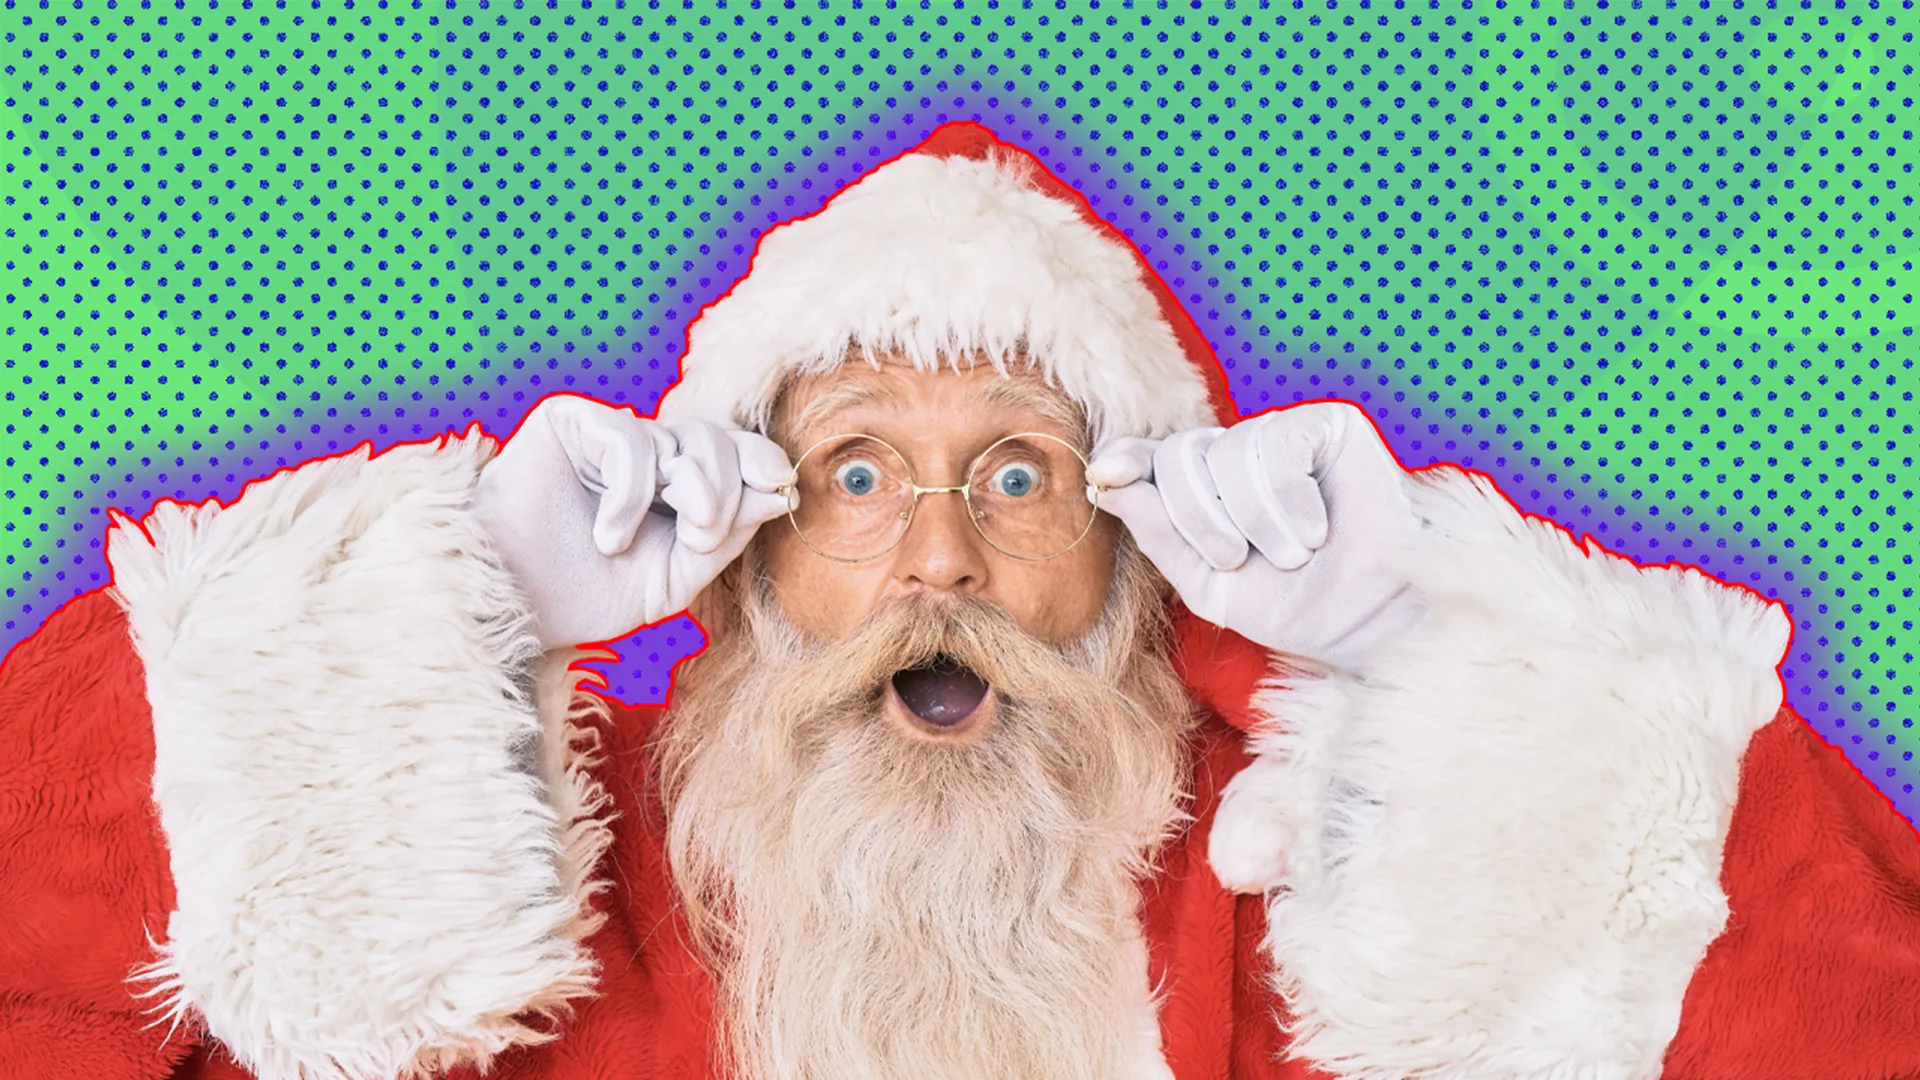 Close-up of Santa Claus in traditional red and white attire holding glasses with his mouth open outlined by a purple halo effect on a green and blue dotted background.